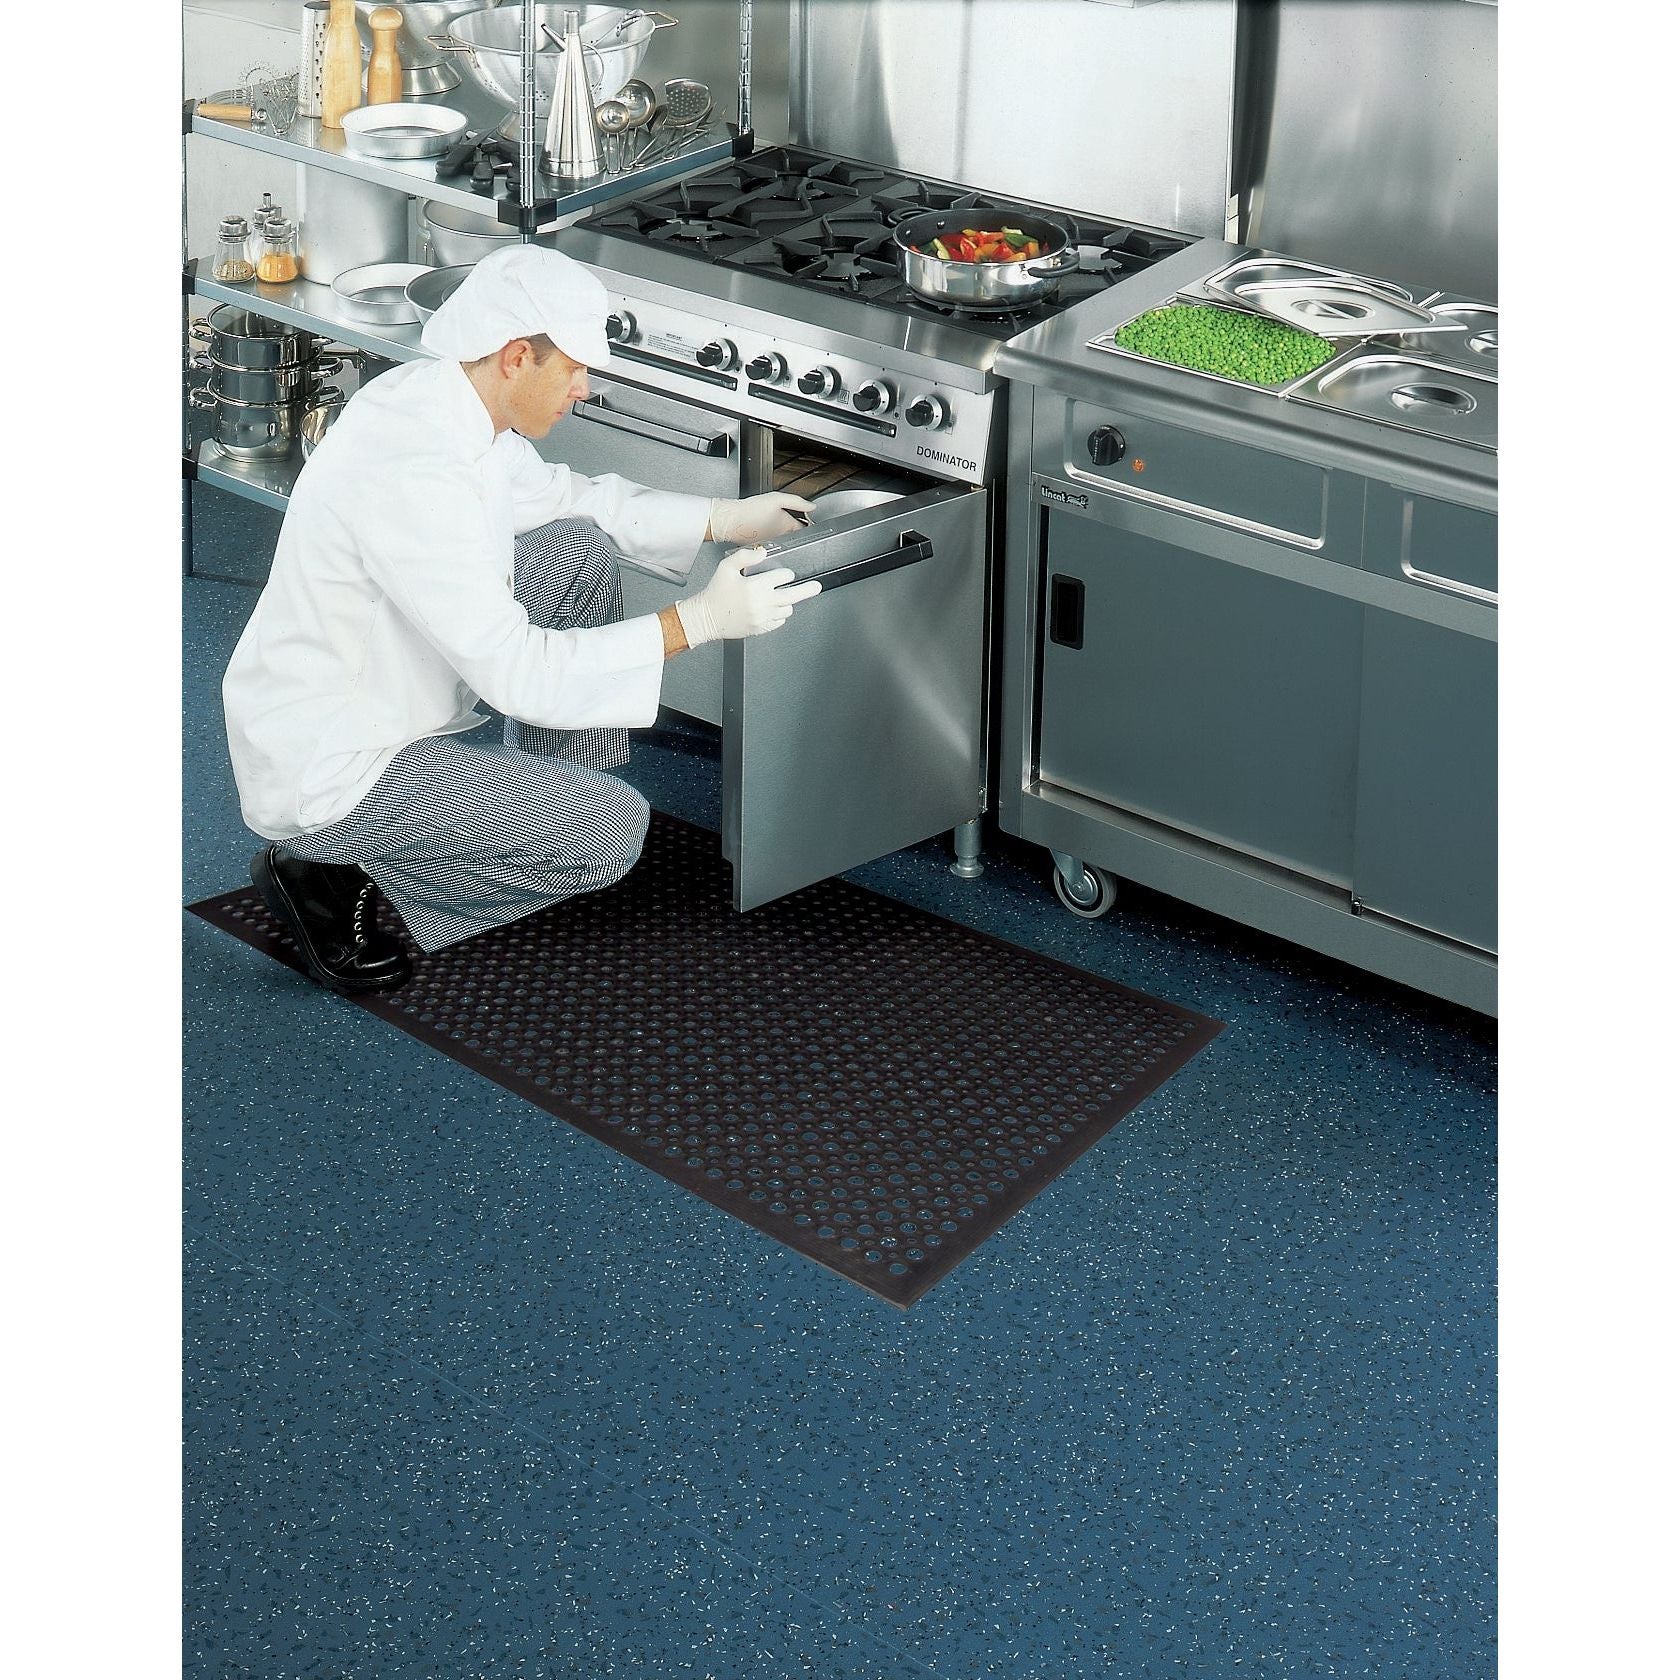 safety-cushion-mat-action-shot-in-commercial-kitchen